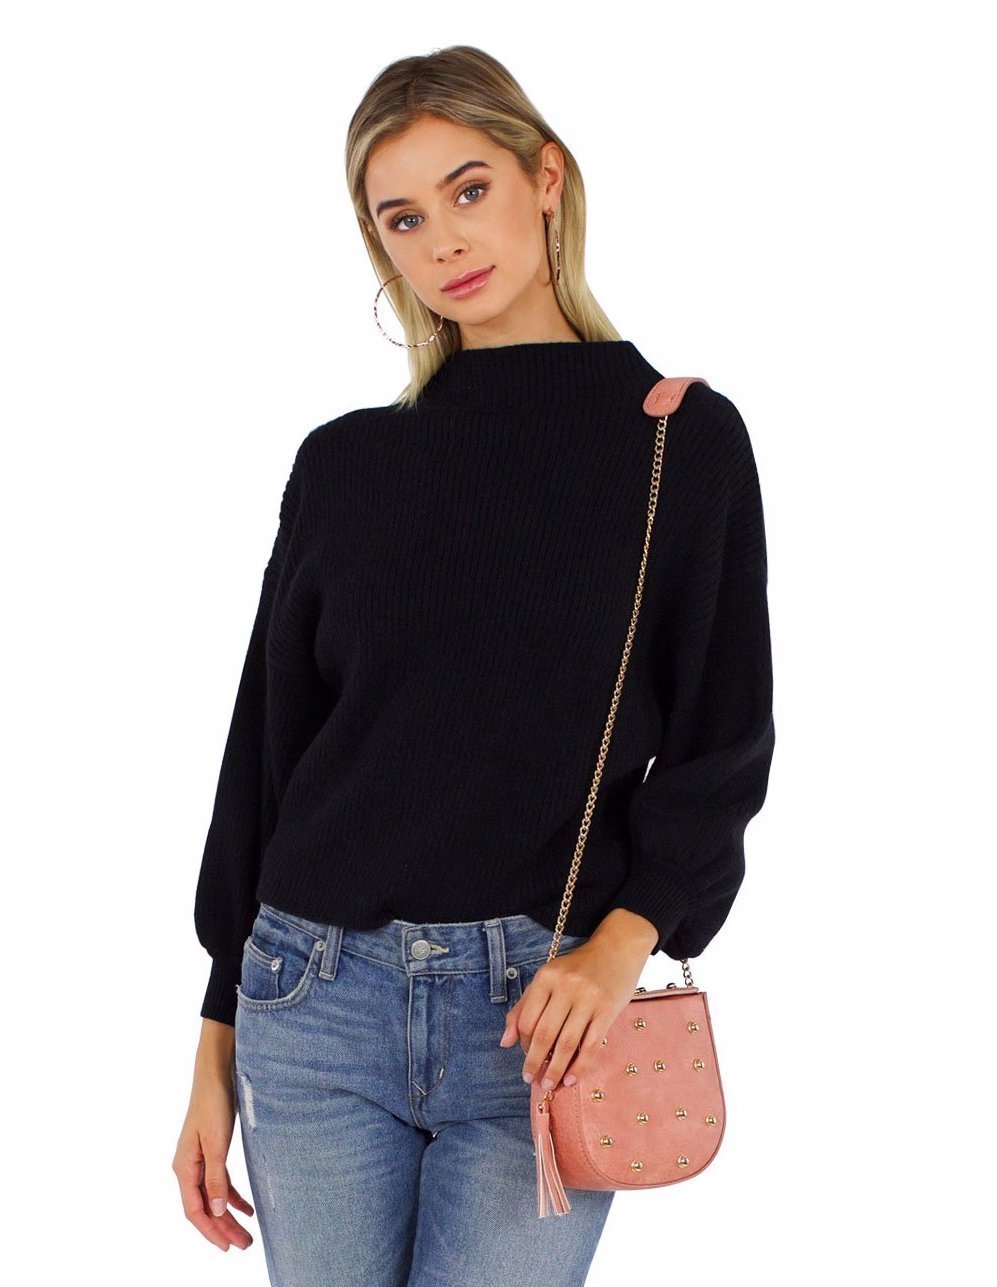 Girl outfit in a top rental from Line & Dot called Balloon Sleeve Pullover Sweater